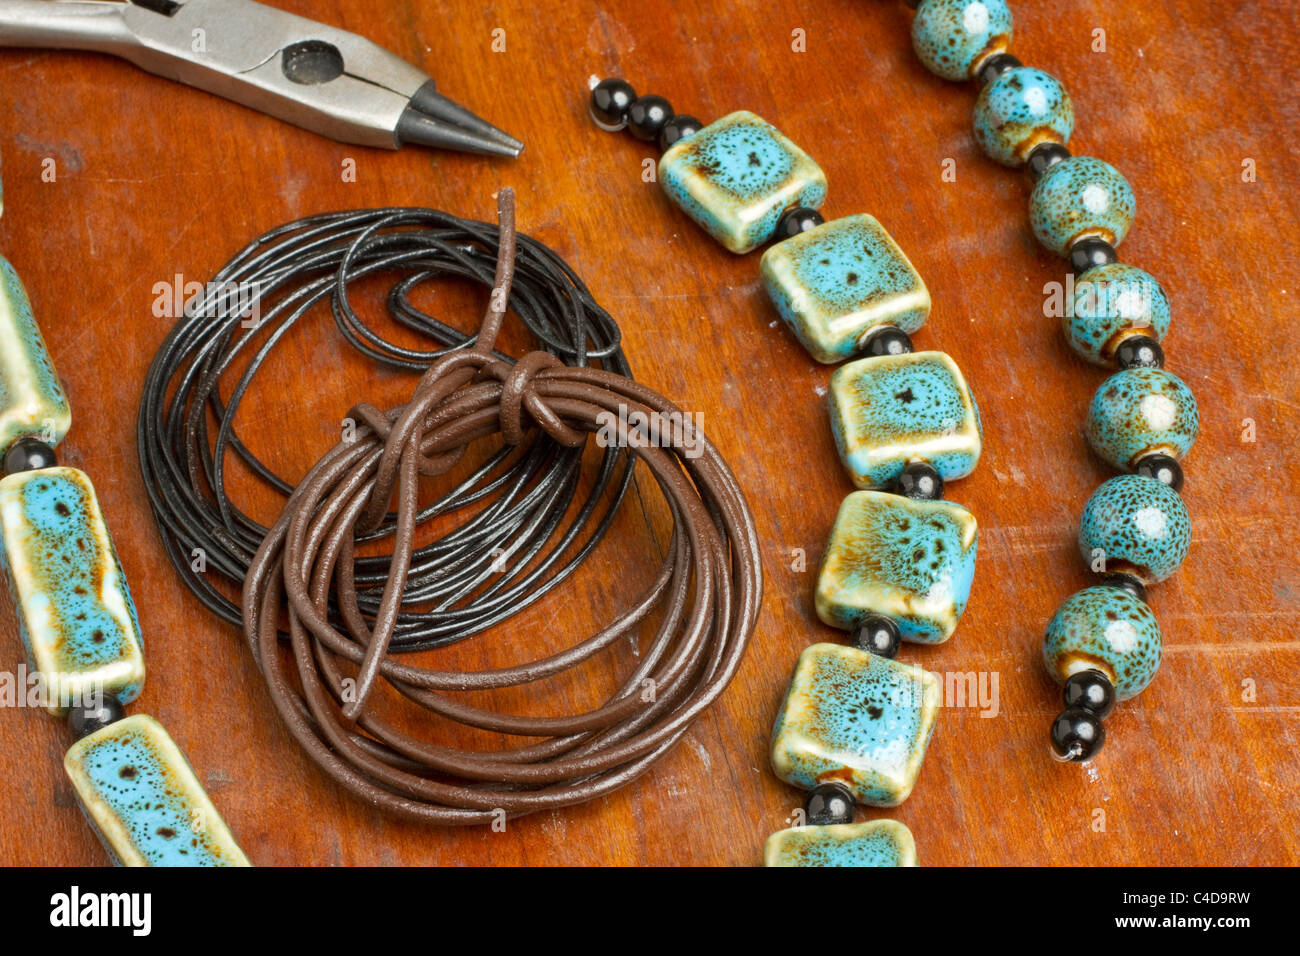 Seen here is a close up of jewelry making and jewelry making equipment. Stock Photo